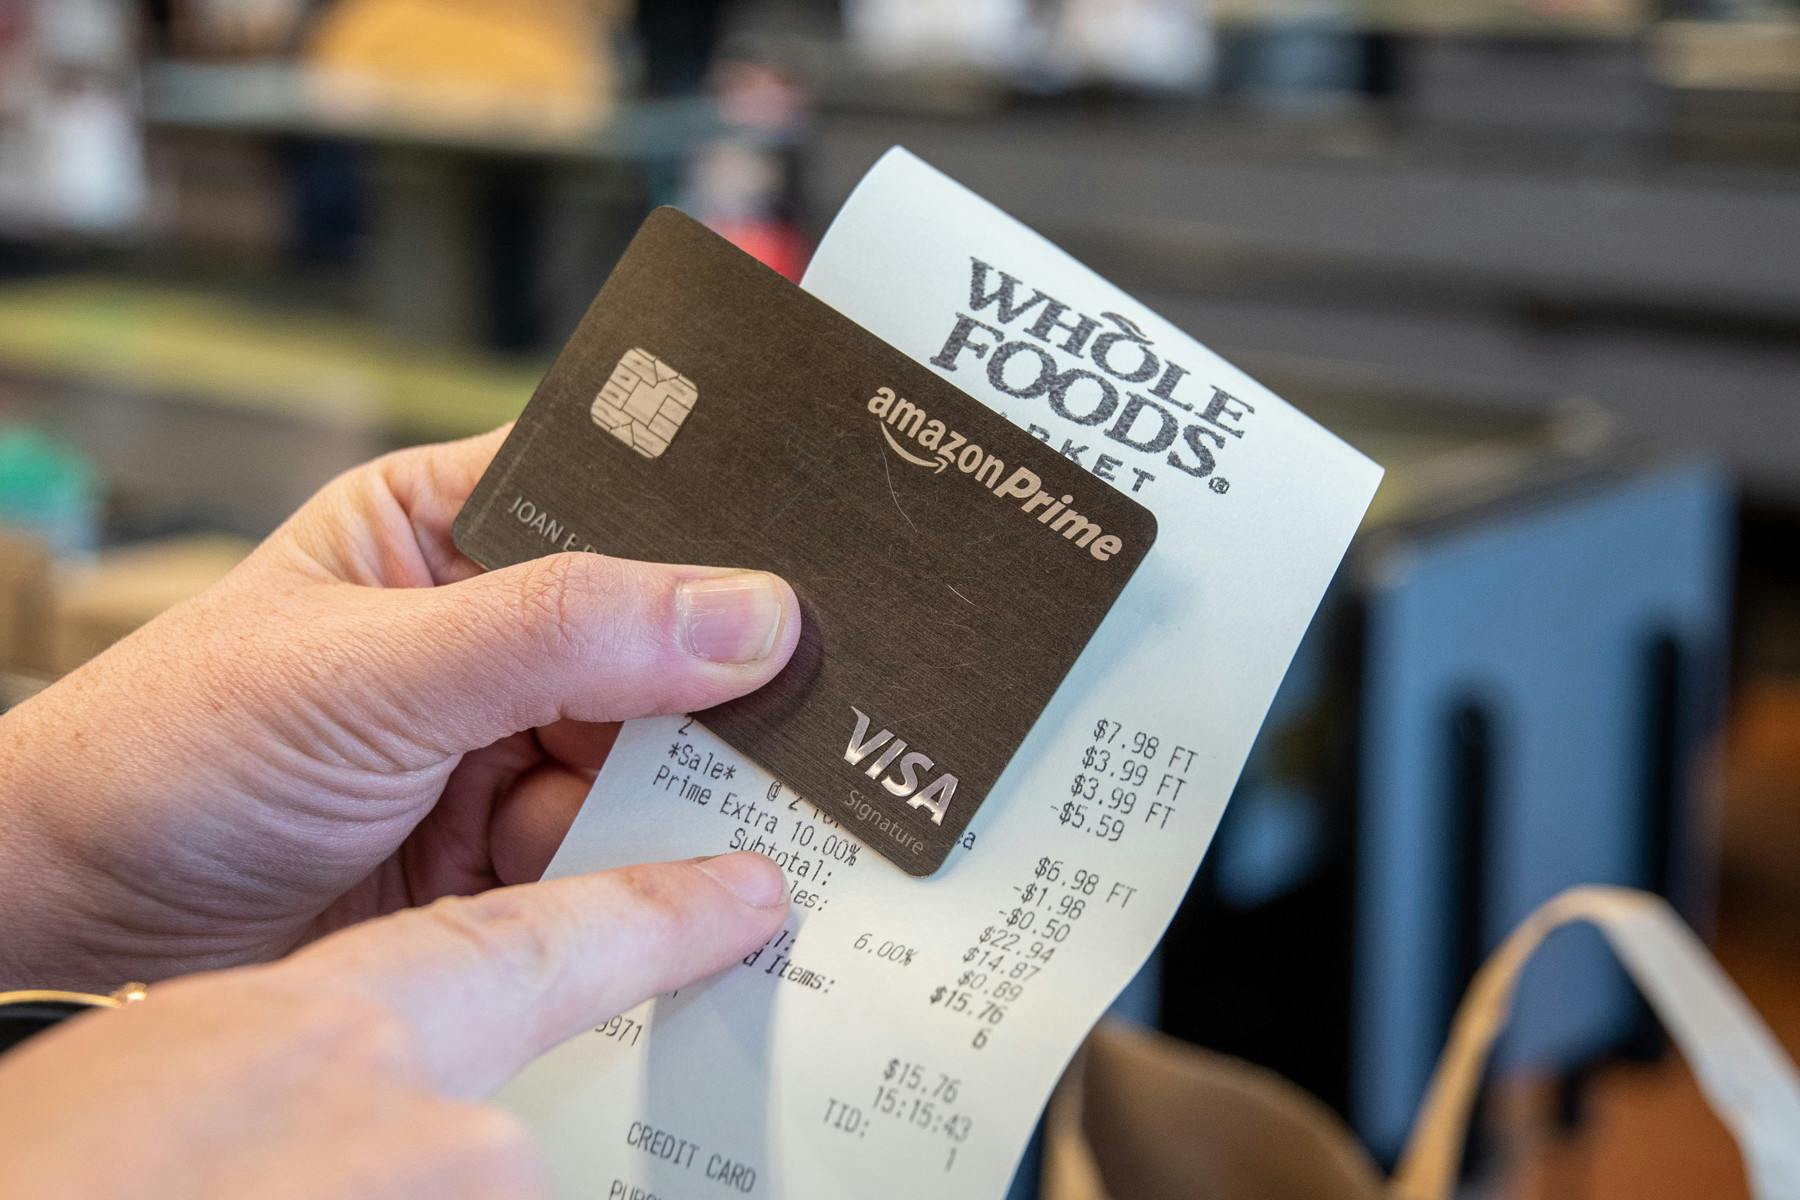 An Amazon Prime credit card being held up with a Whole Foods receipt. The person holding them is using their other hand to point at something on the receipt.